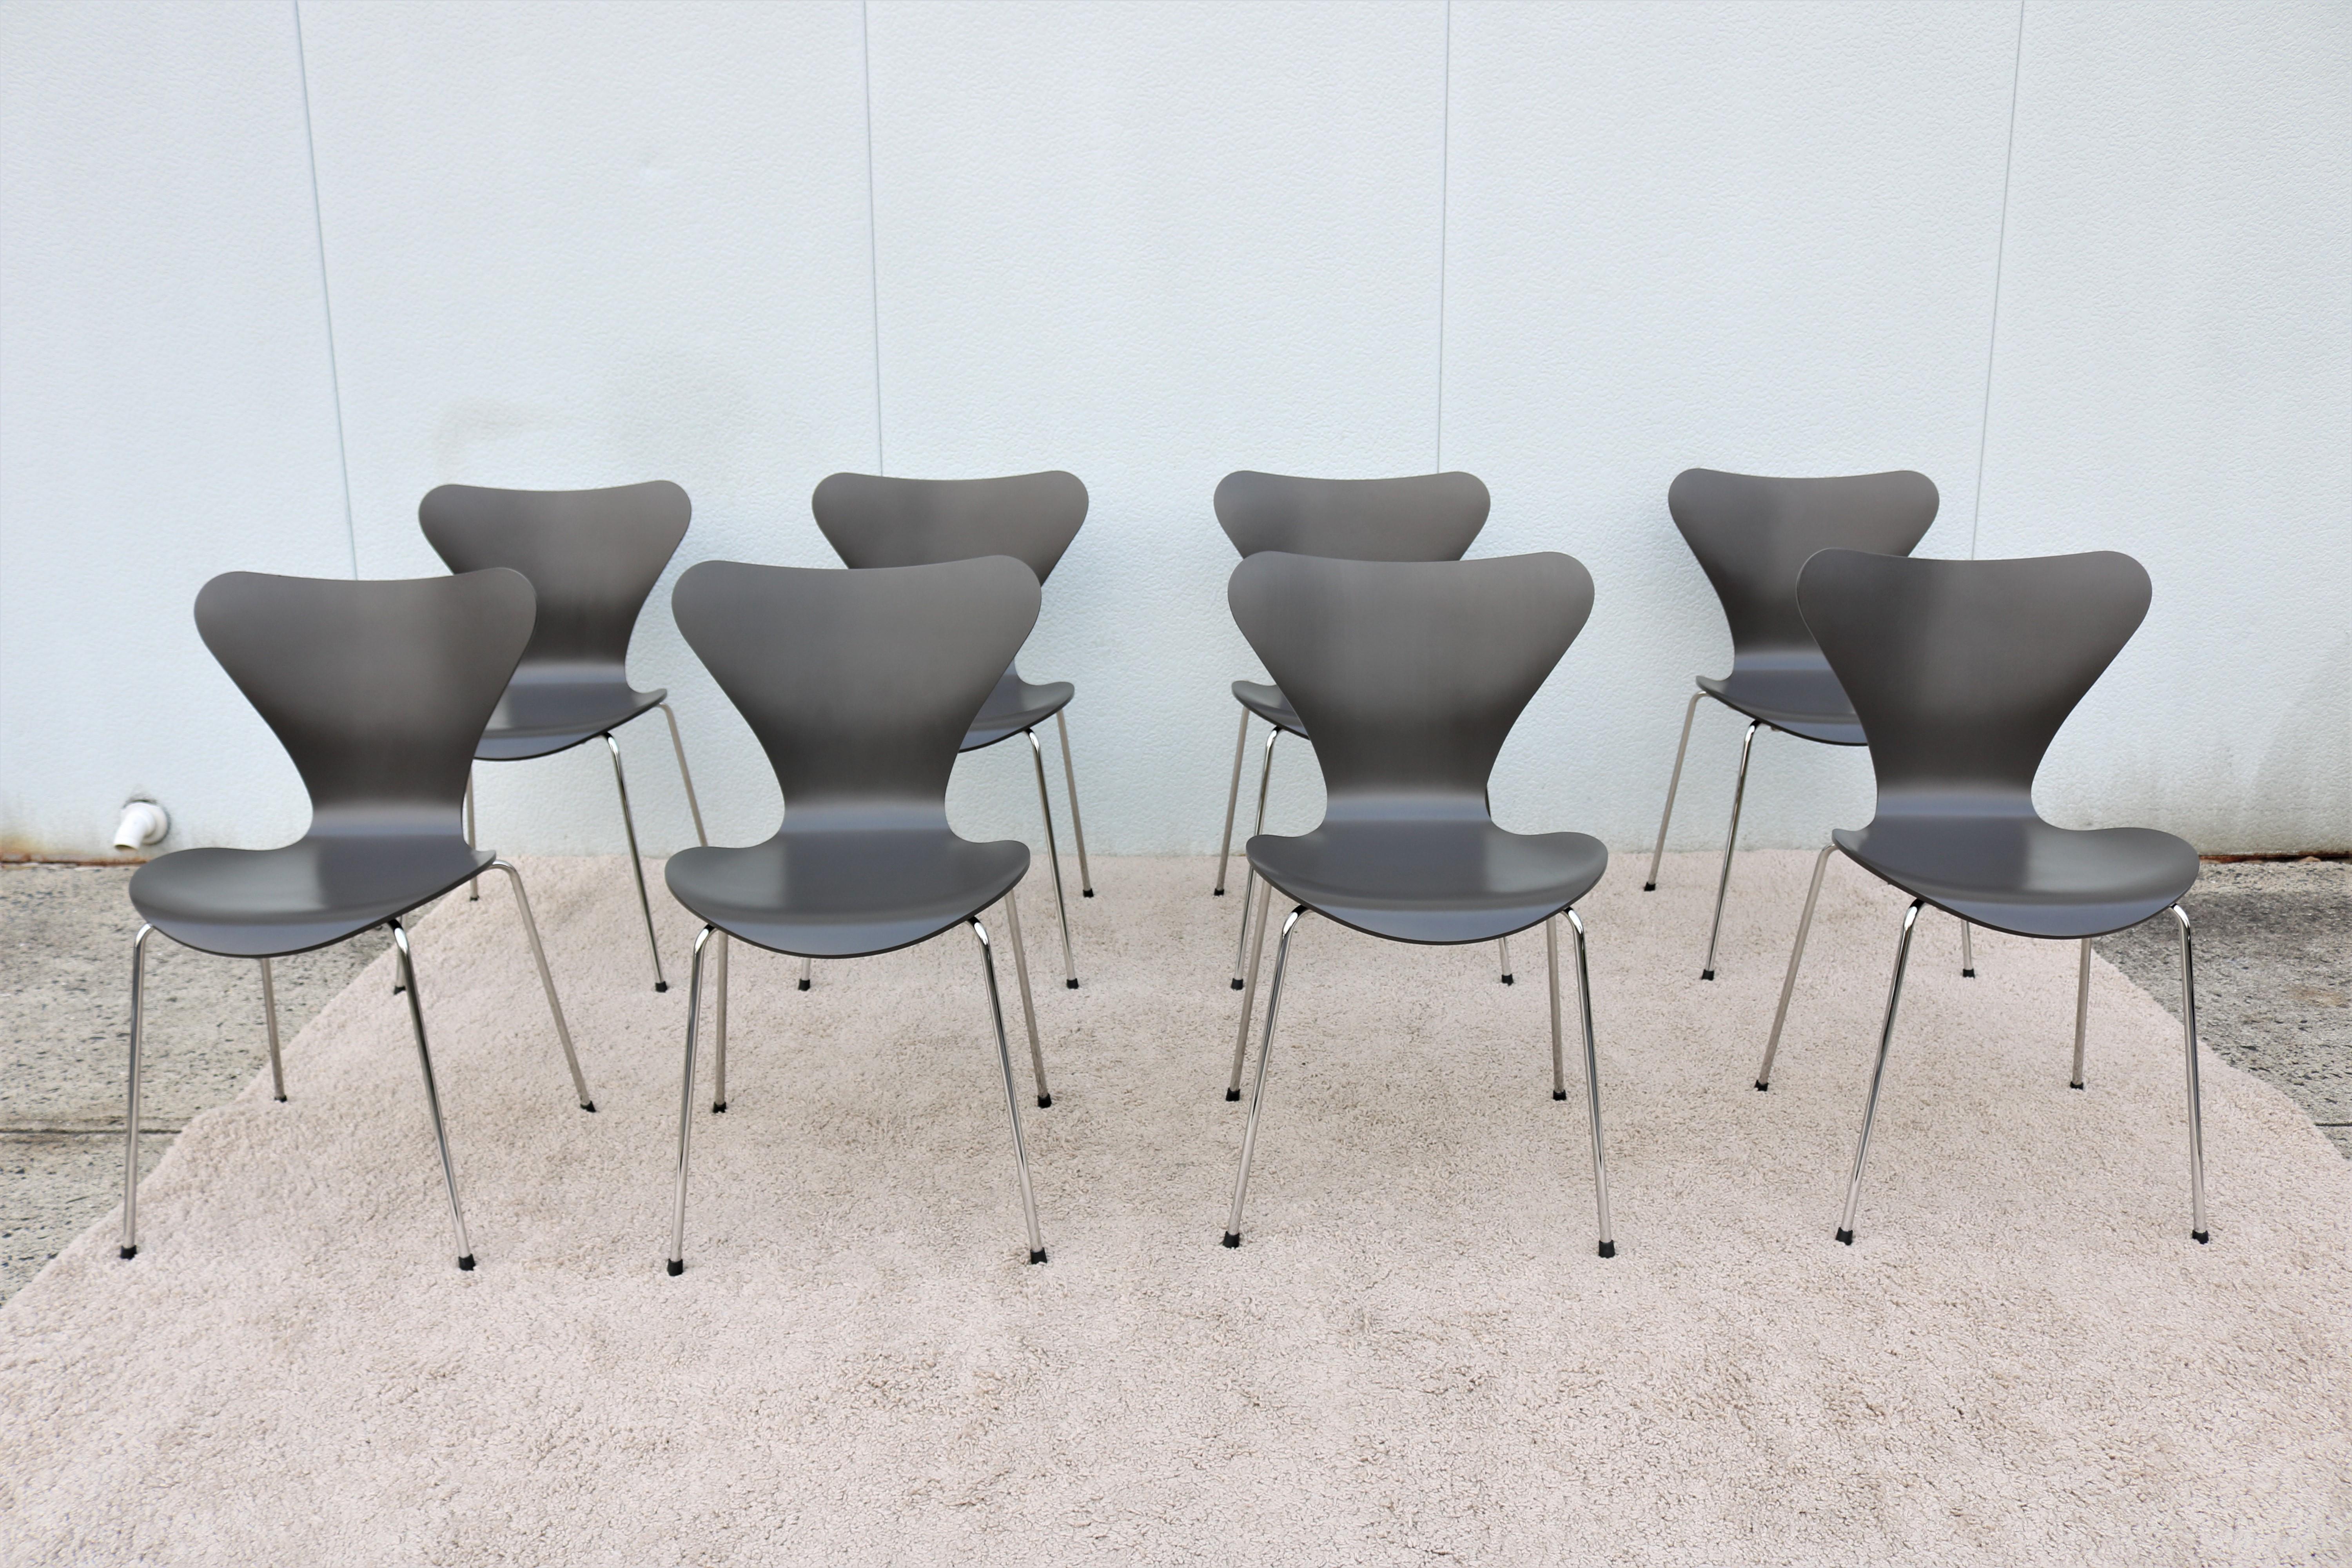 This elegant and Versatile series 7 Chairs was introduced in 1955 by the designer Arne Jacobsen and instantly became an iconic design.
Very Comfortable bentwood seat, it is by far the most sold chair in the history of Fritz Hansen.
Looks